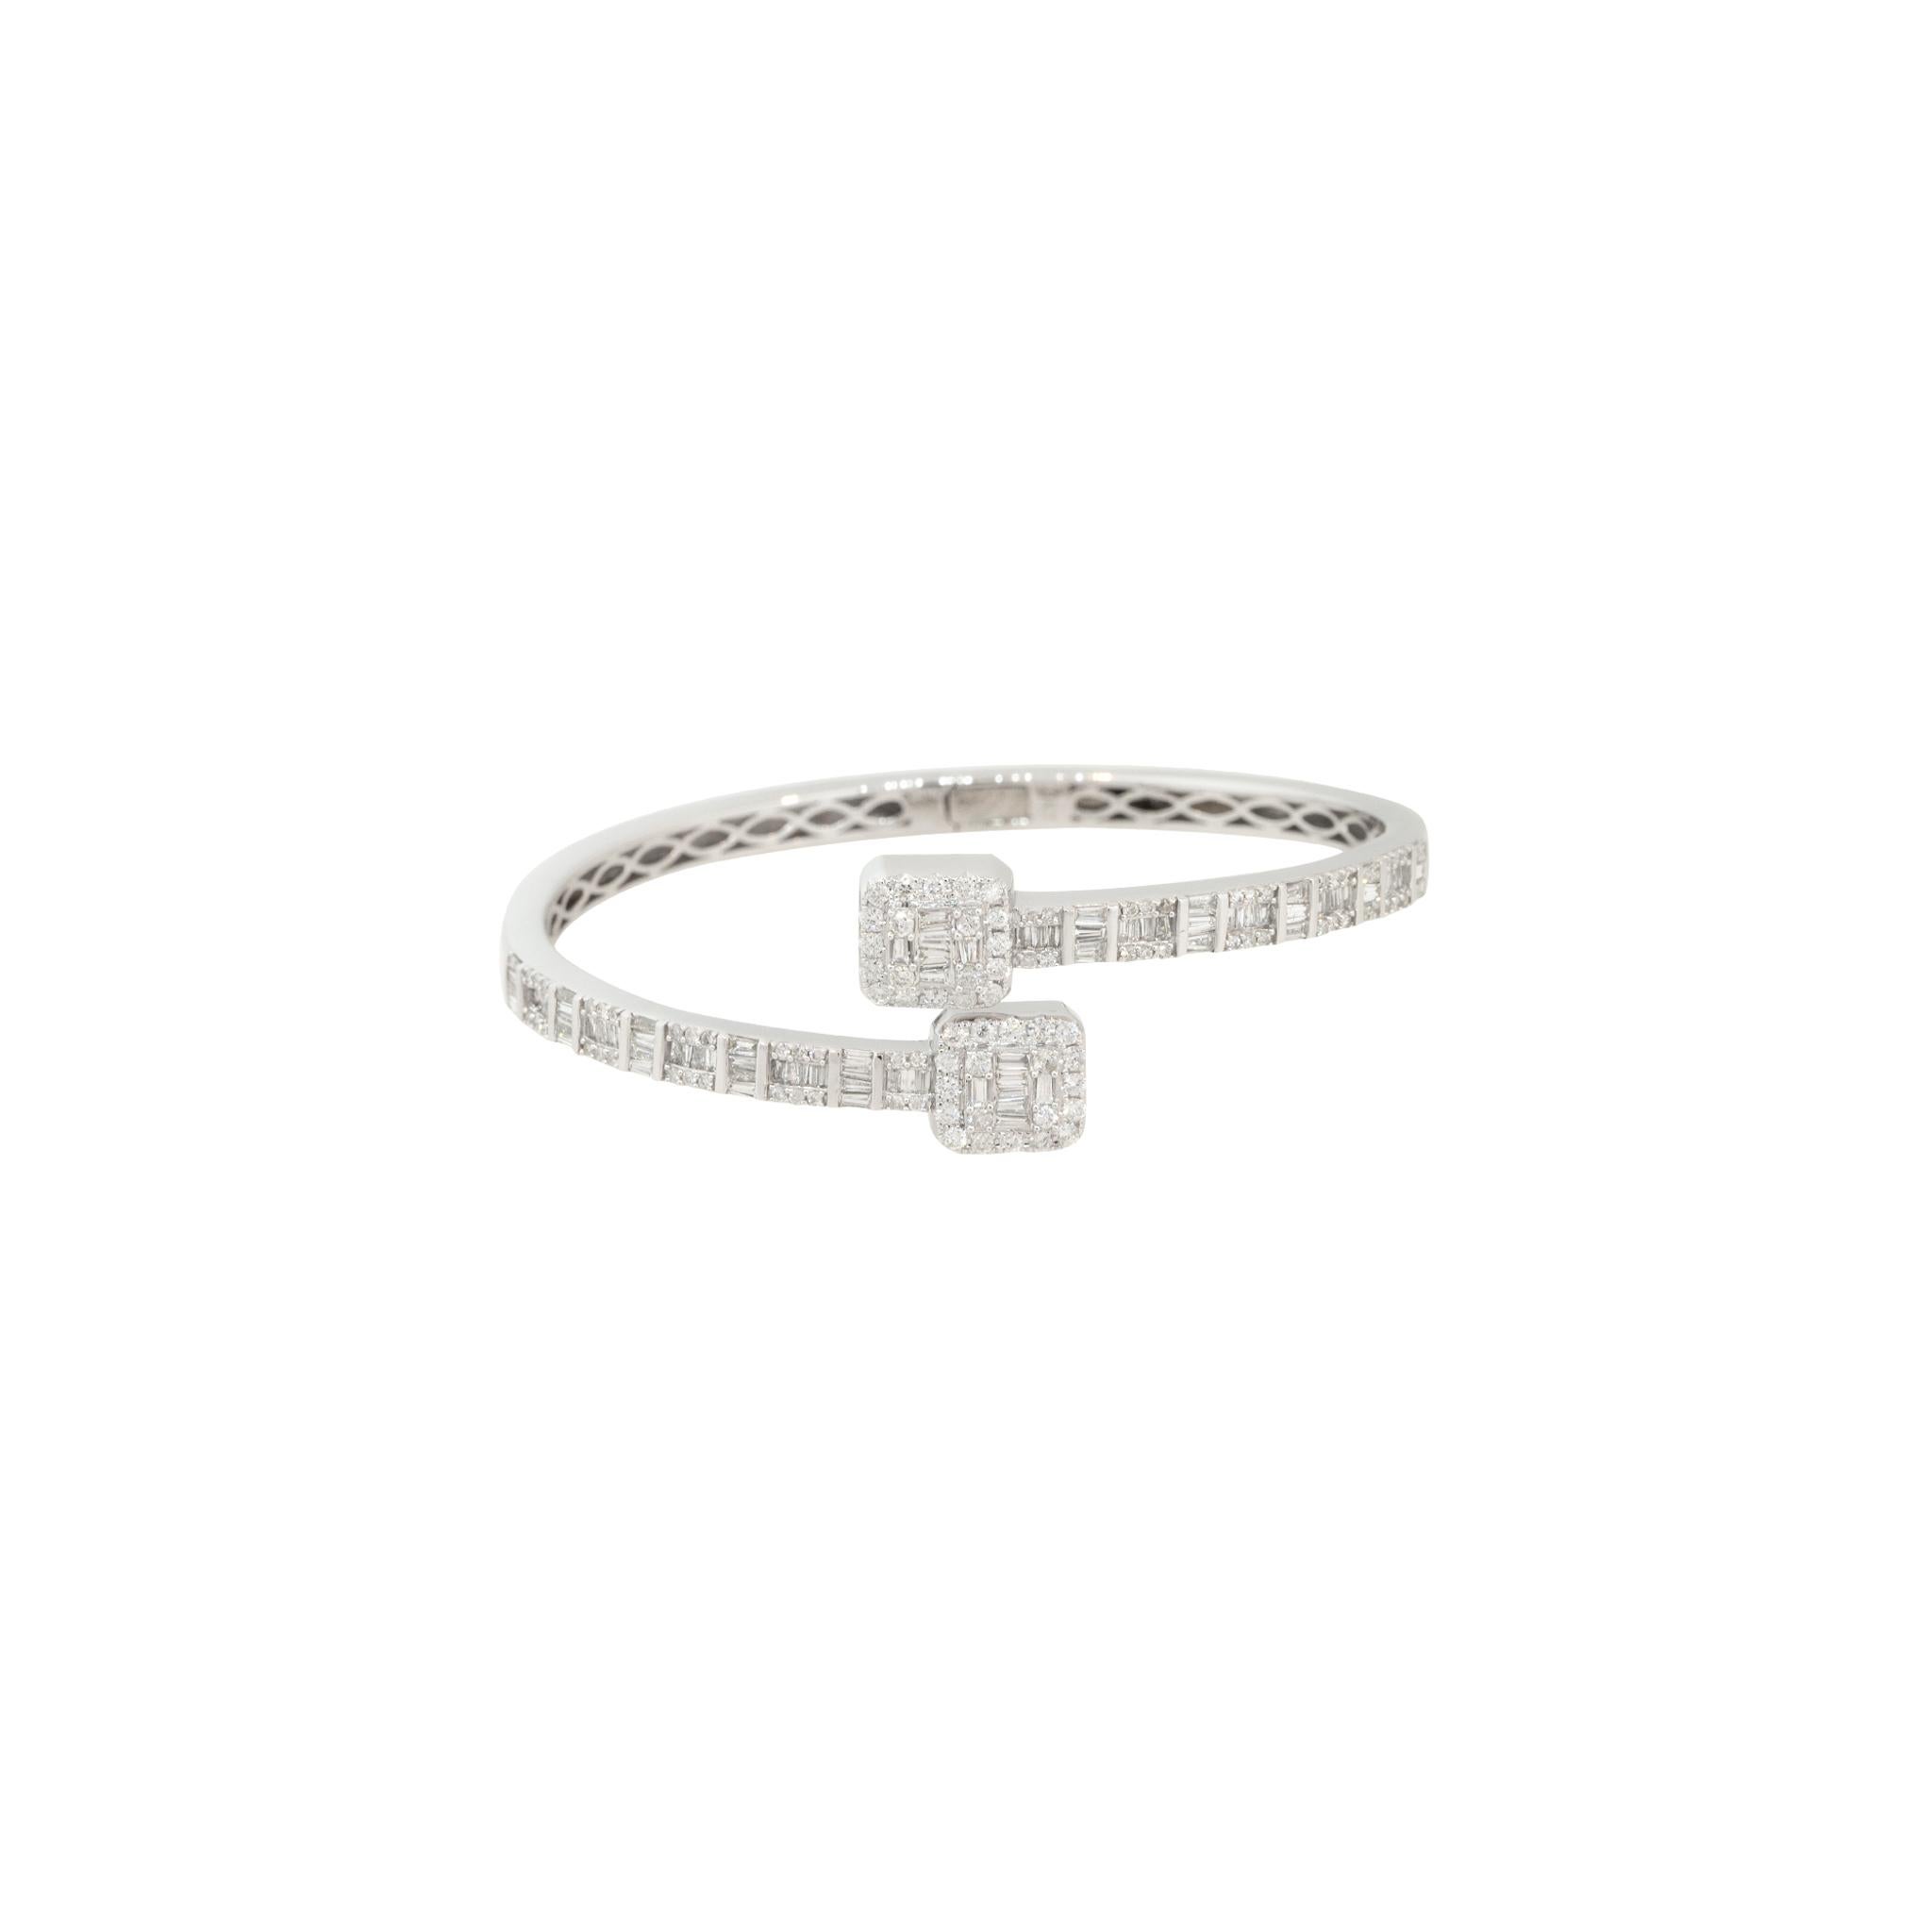 14k White Gold 2.40ctw Round and Baguette Shaped Diamond Cuff Bracelet

Raymond Lee Jewelers in Boca Raton -- South Florida’s destination for diamonds, fine jewelry, antique jewelry, estate pieces, and vintage jewels.

Style: Women's Diamond